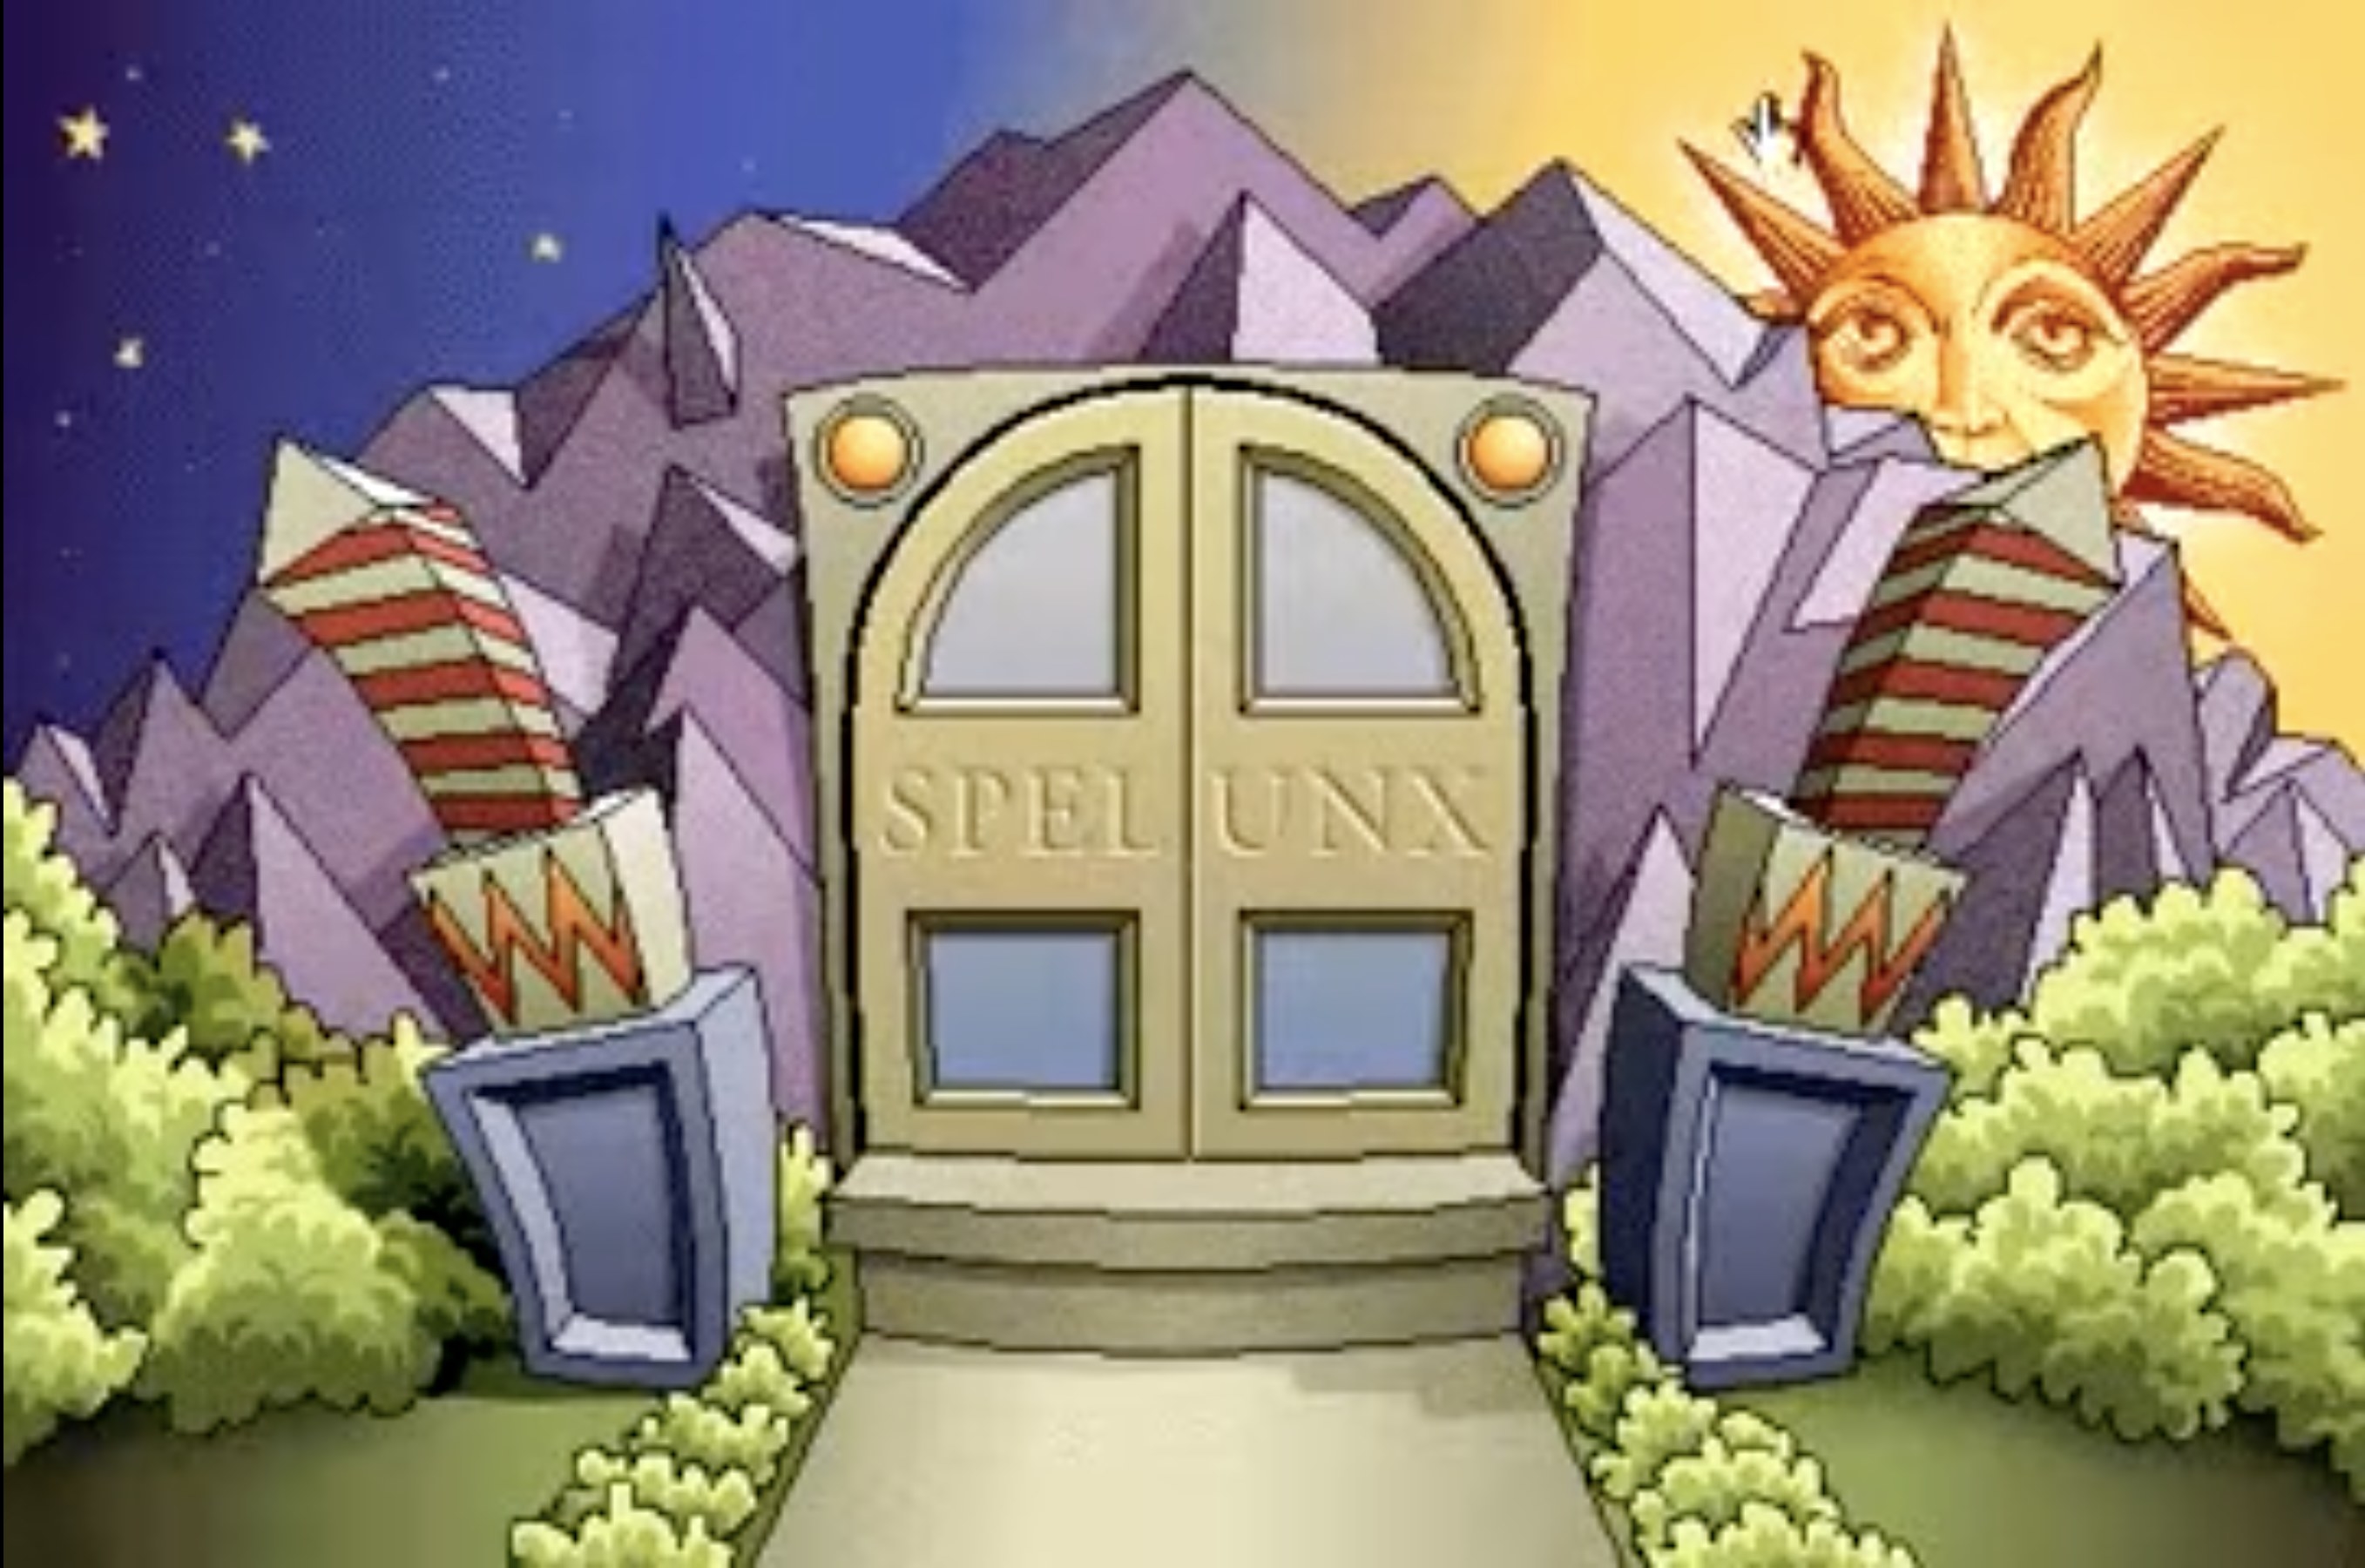 The beginning of the first level of the game, with a door on which is written Spelunx